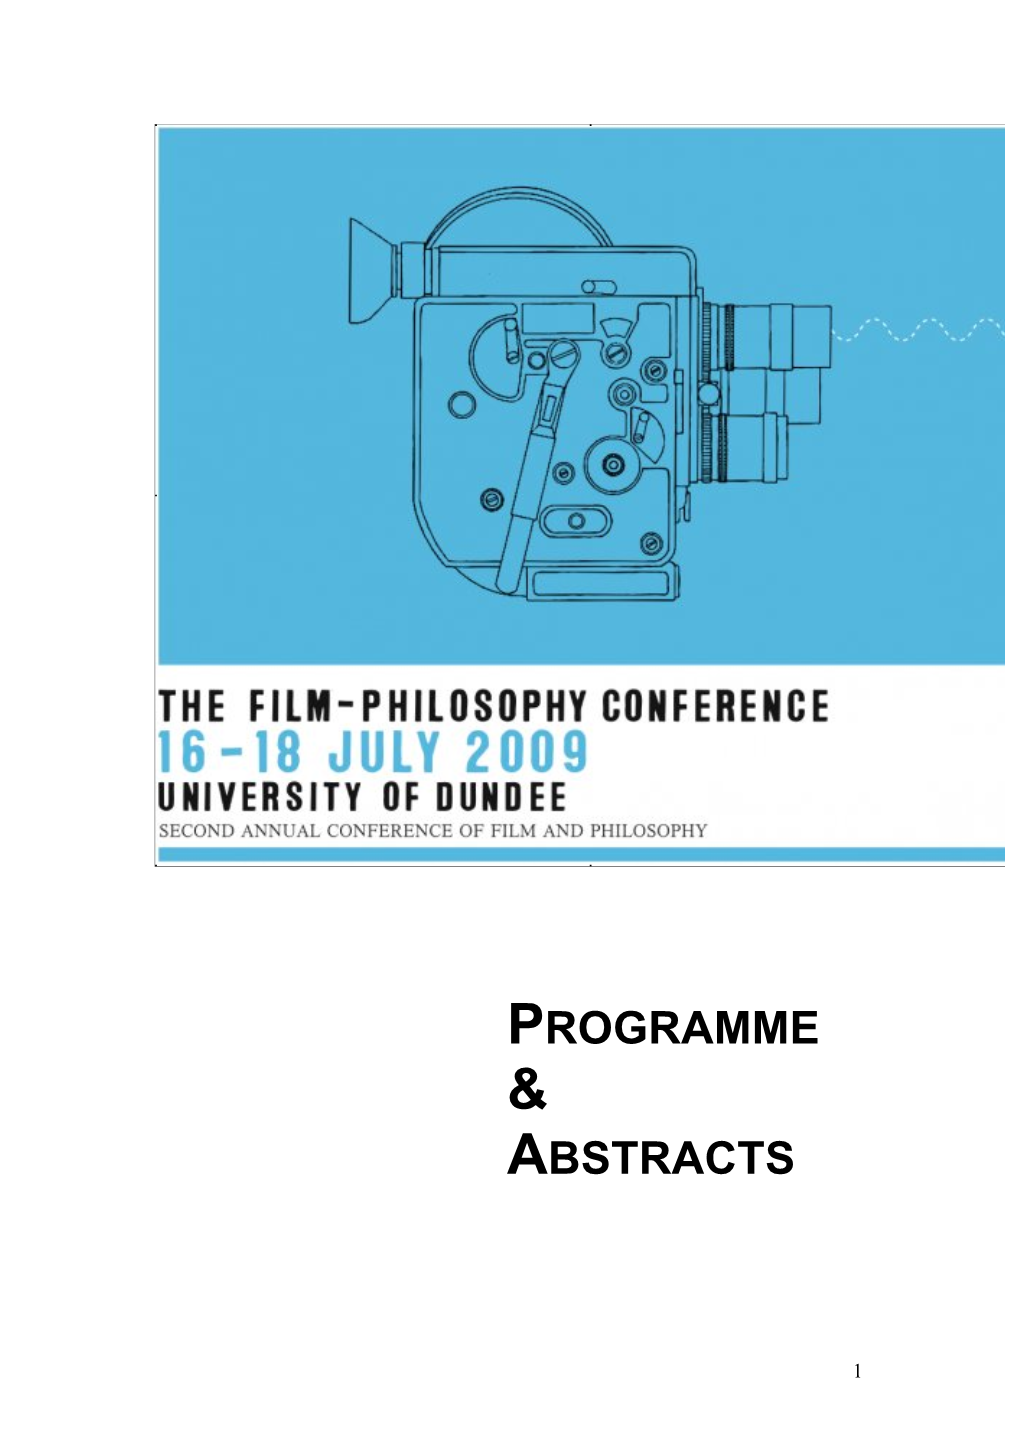 F-P Conference Programme 2009